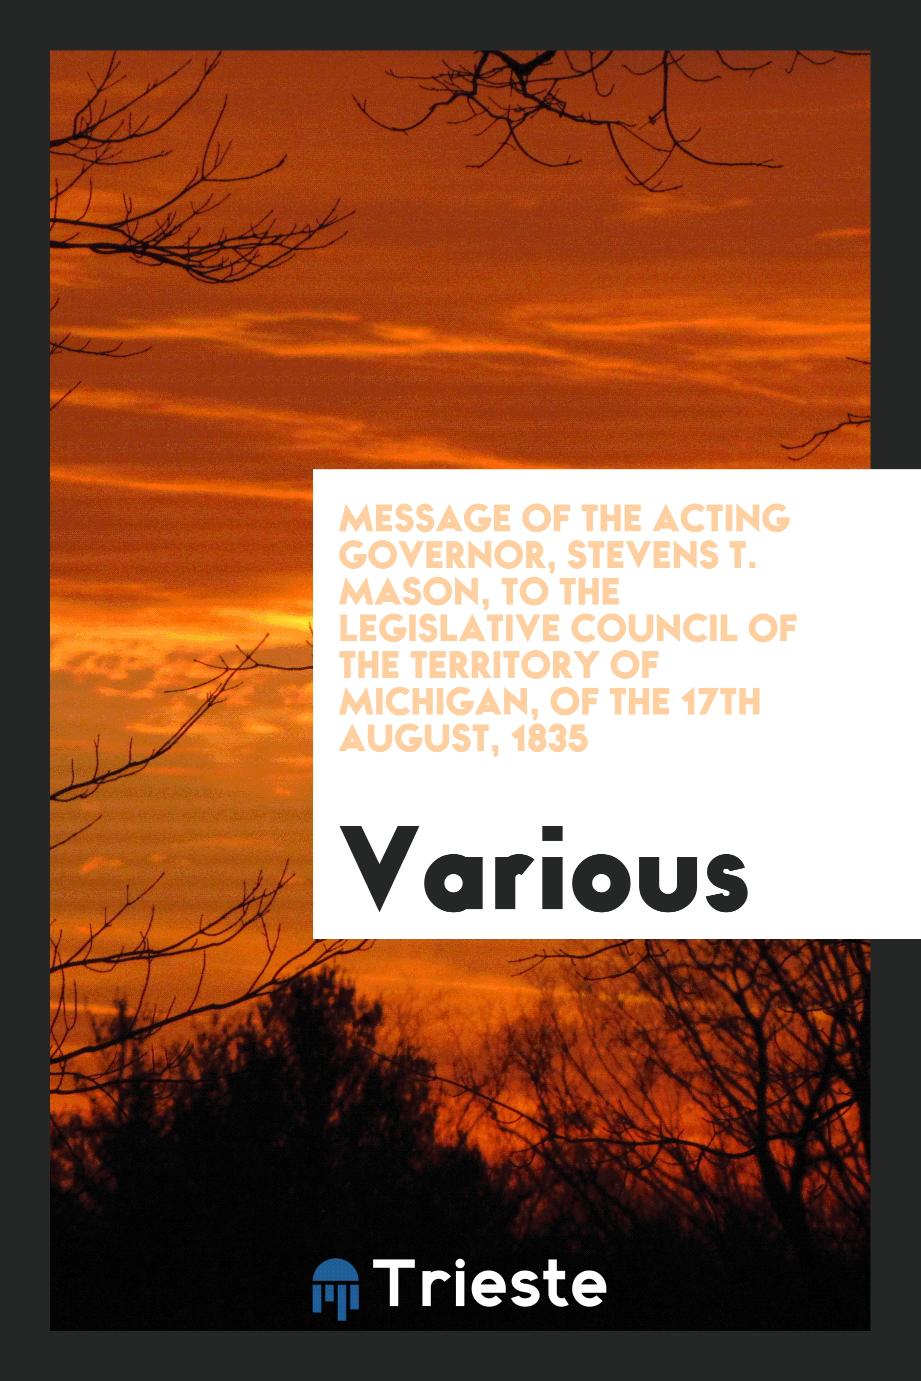 Message of the Acting Governor, Stevens T. Mason, to the Legislative Council of the territory of Michigan, of the 17th August, 1835